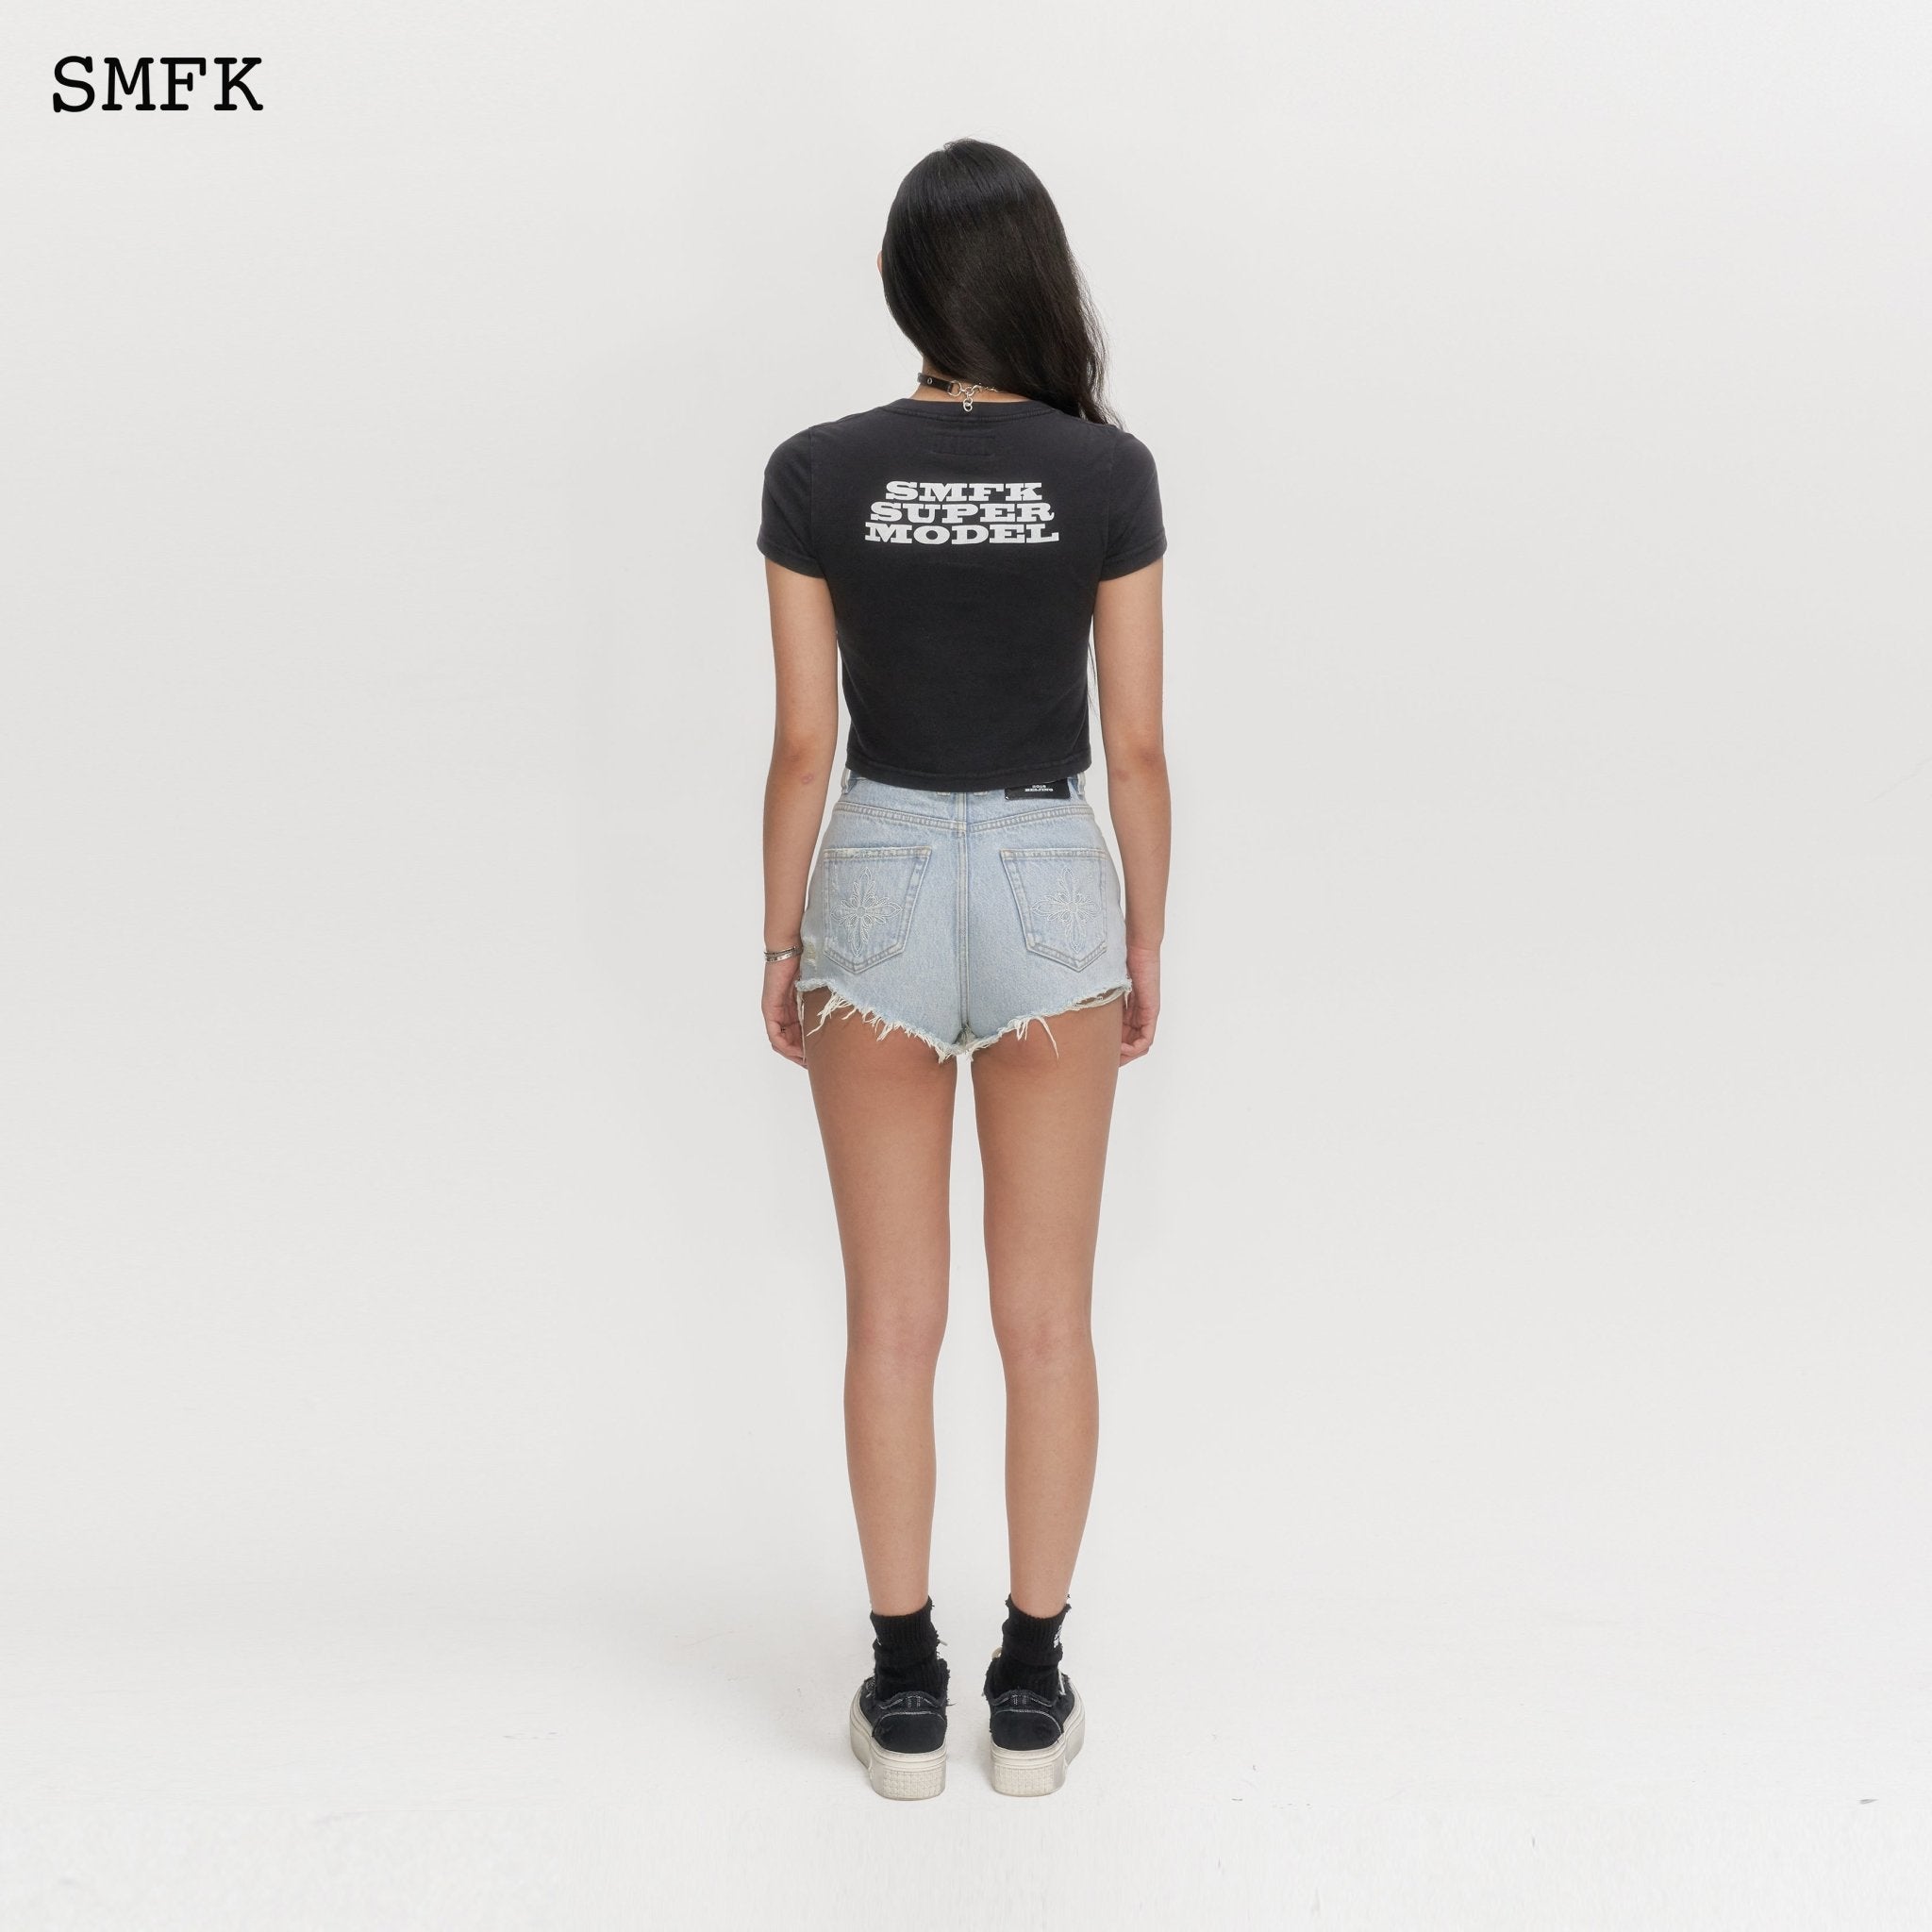 SMFK Wilderness Rock Blue Short Jeans | MADA IN CHINA